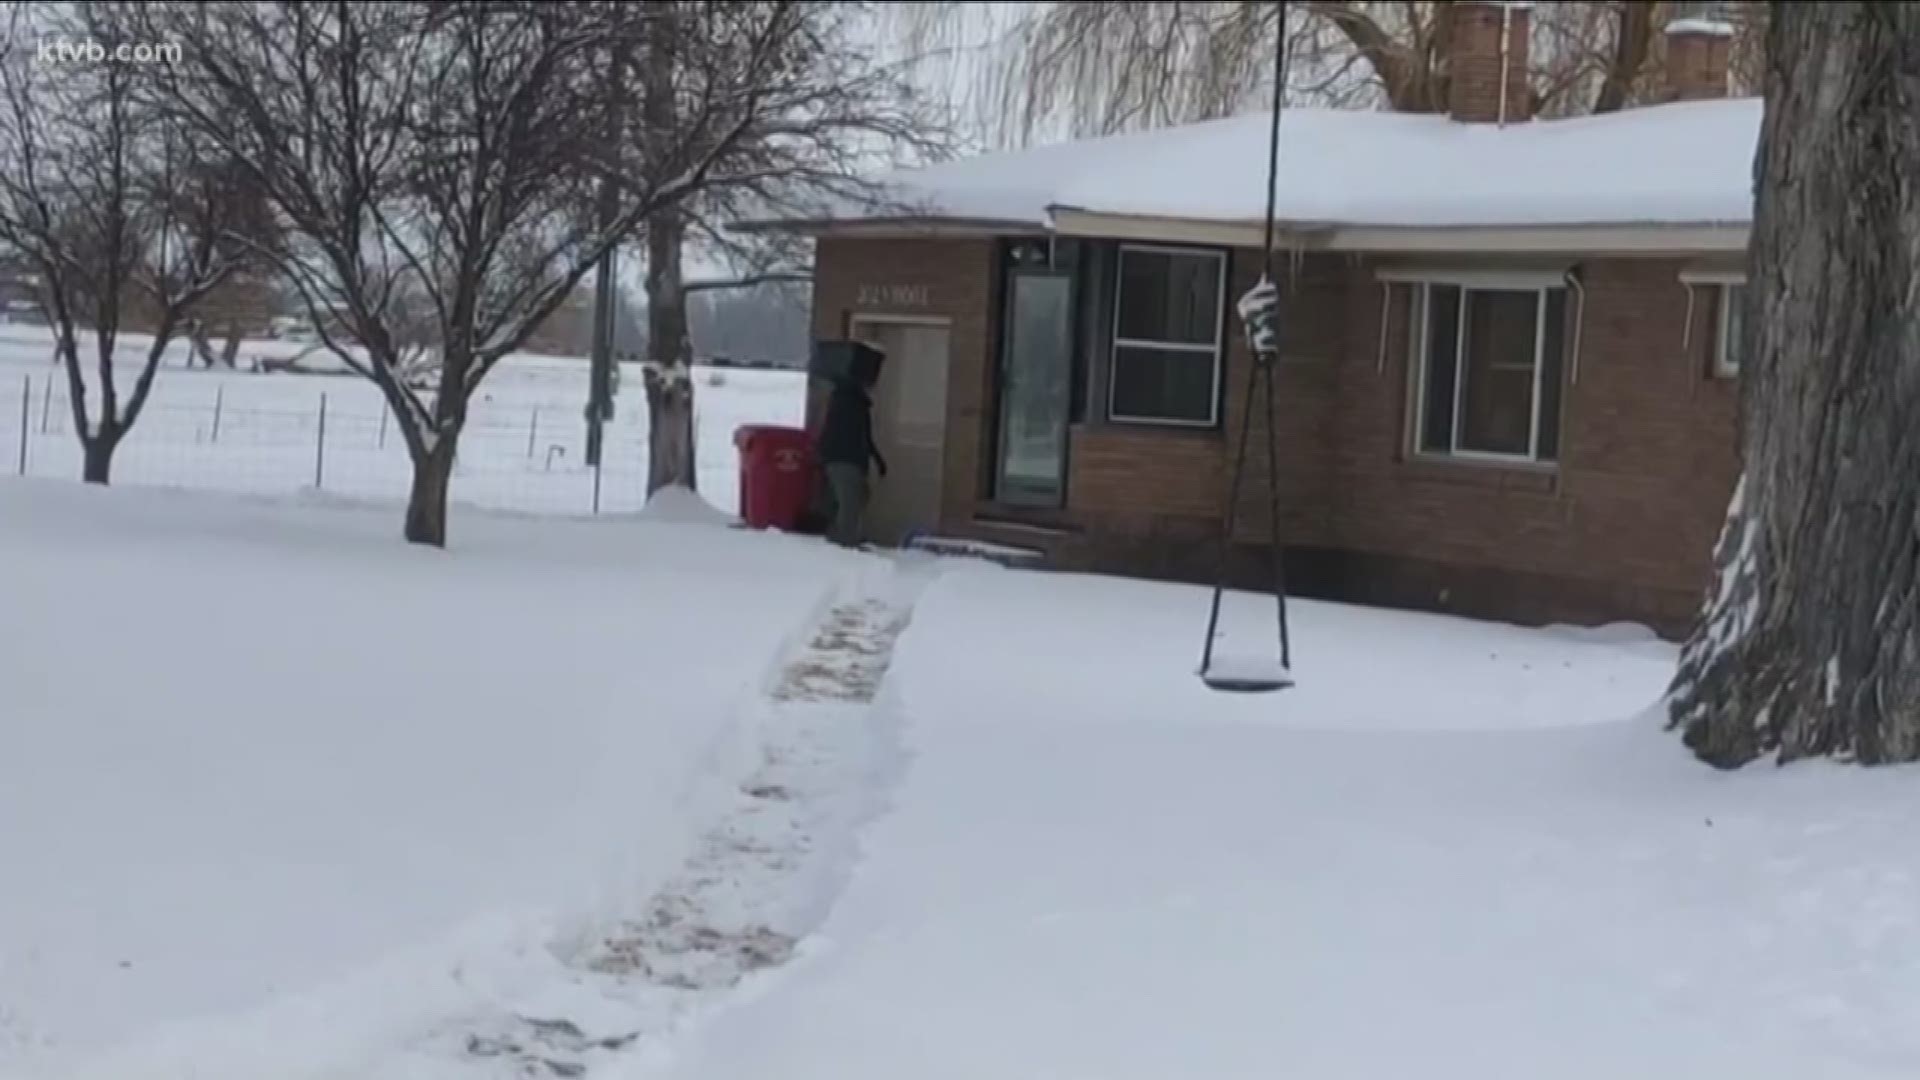 Police in eastern Idaho searched the Rexburg home of Chad Daybell, a person of interest in the case of two missing children.